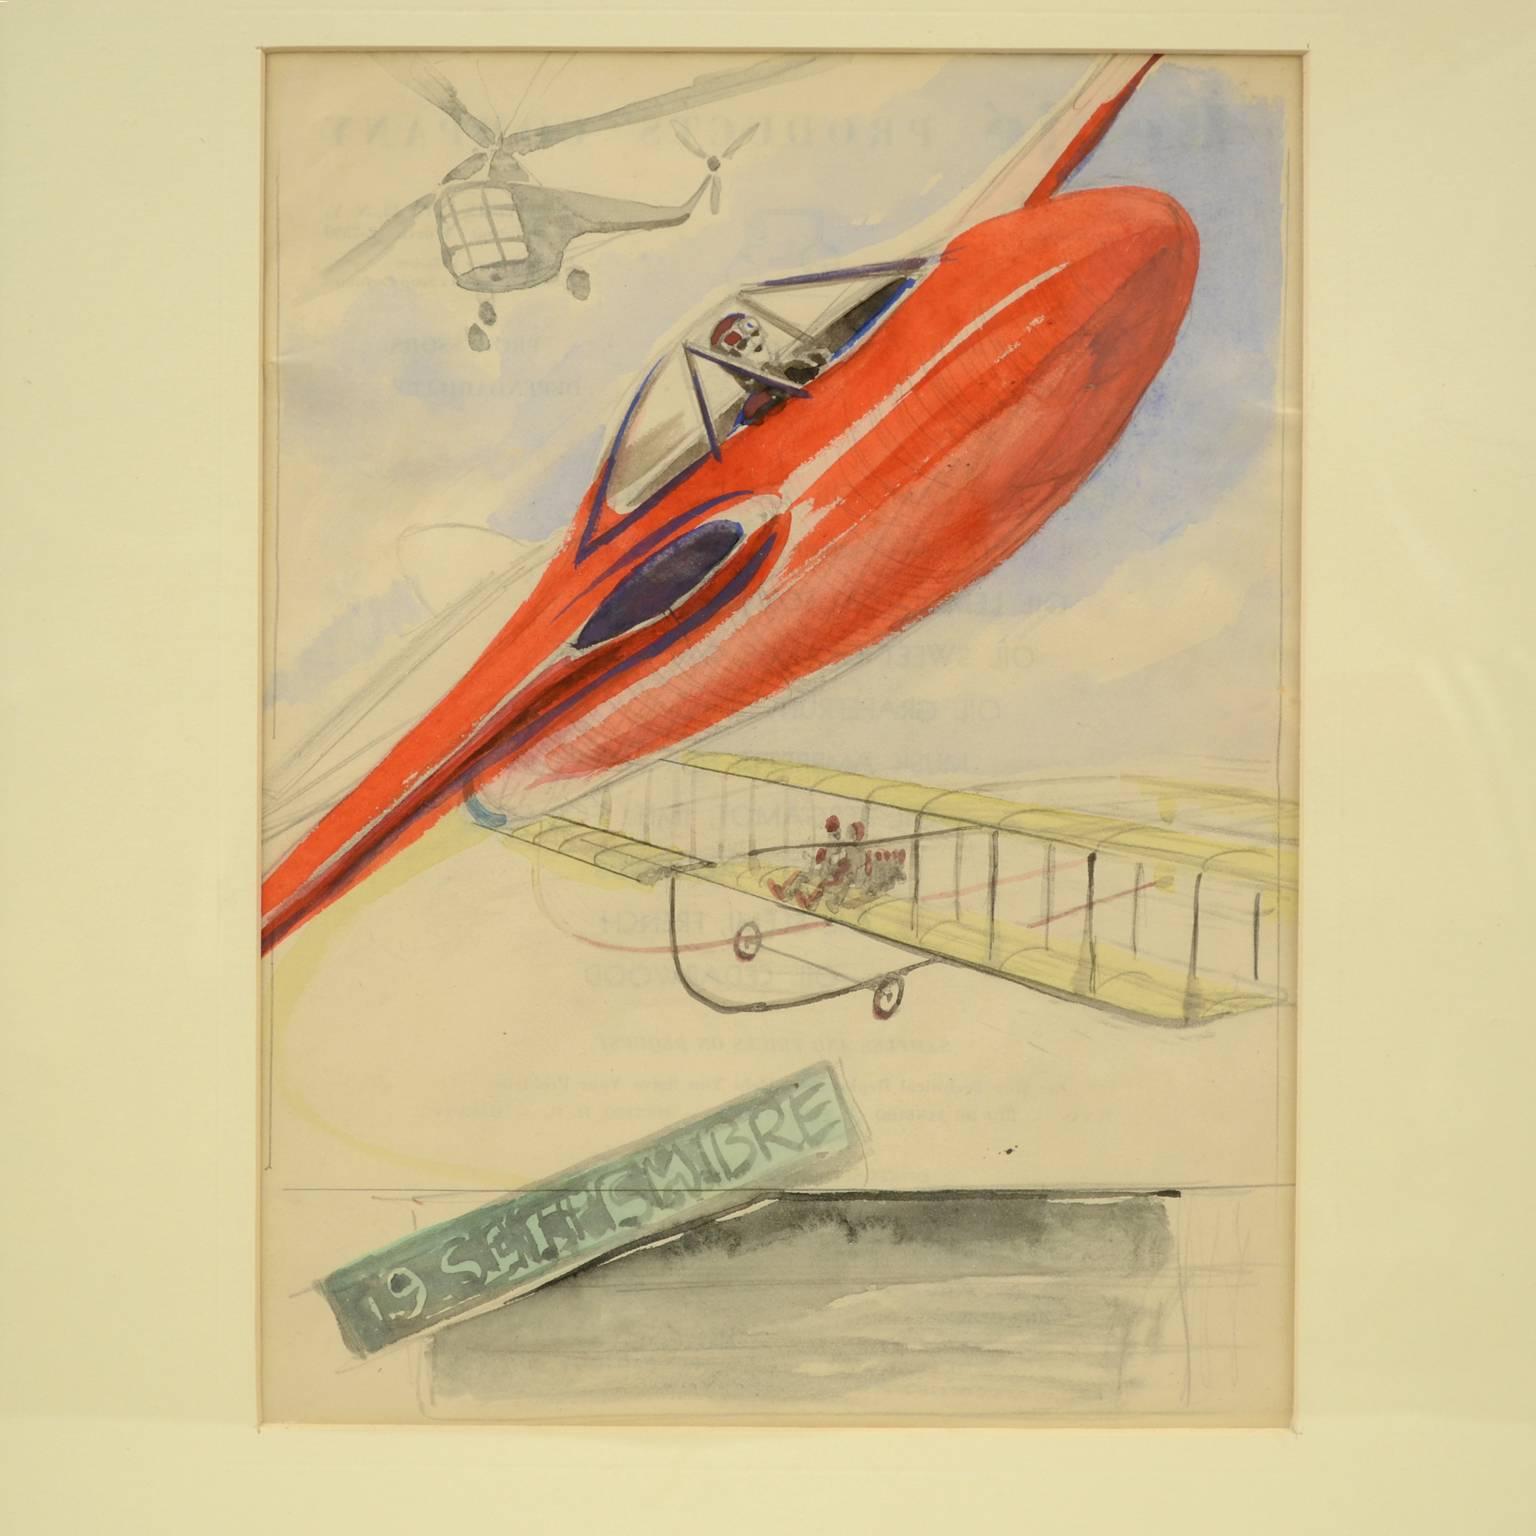 Preparatory sketch, watercolor, of a poster about the aeronautical competition Gran Premio Milano on 19th September 1948, depicting three types of flying machines, made by Riccardo Cavigioli. Measures: Including frame 38 x 1.7 x 45 cm, 14.9 x 0.66 x